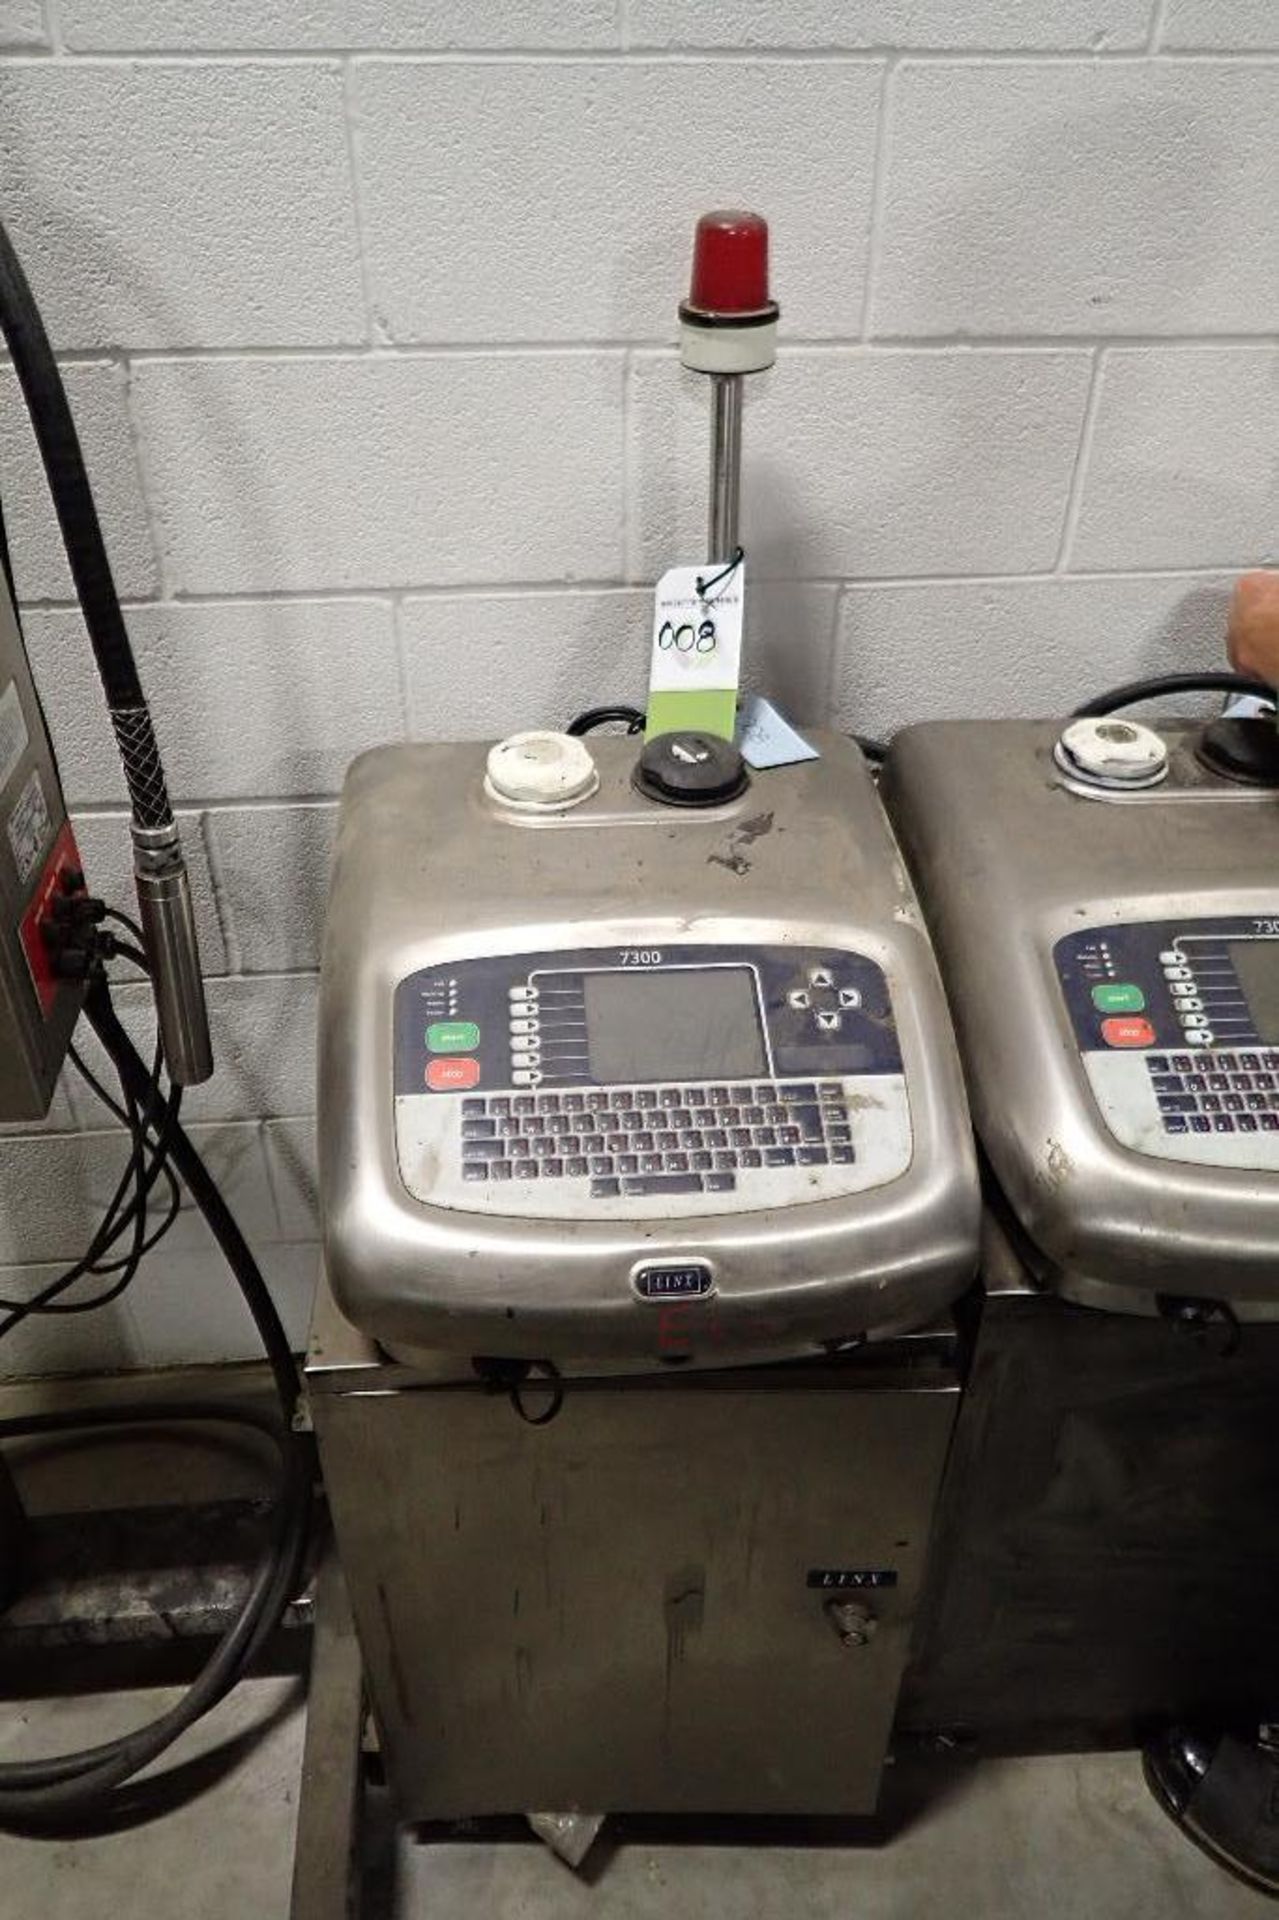 2011 Linx 7300 ink jet coder {Located in North East, PA}